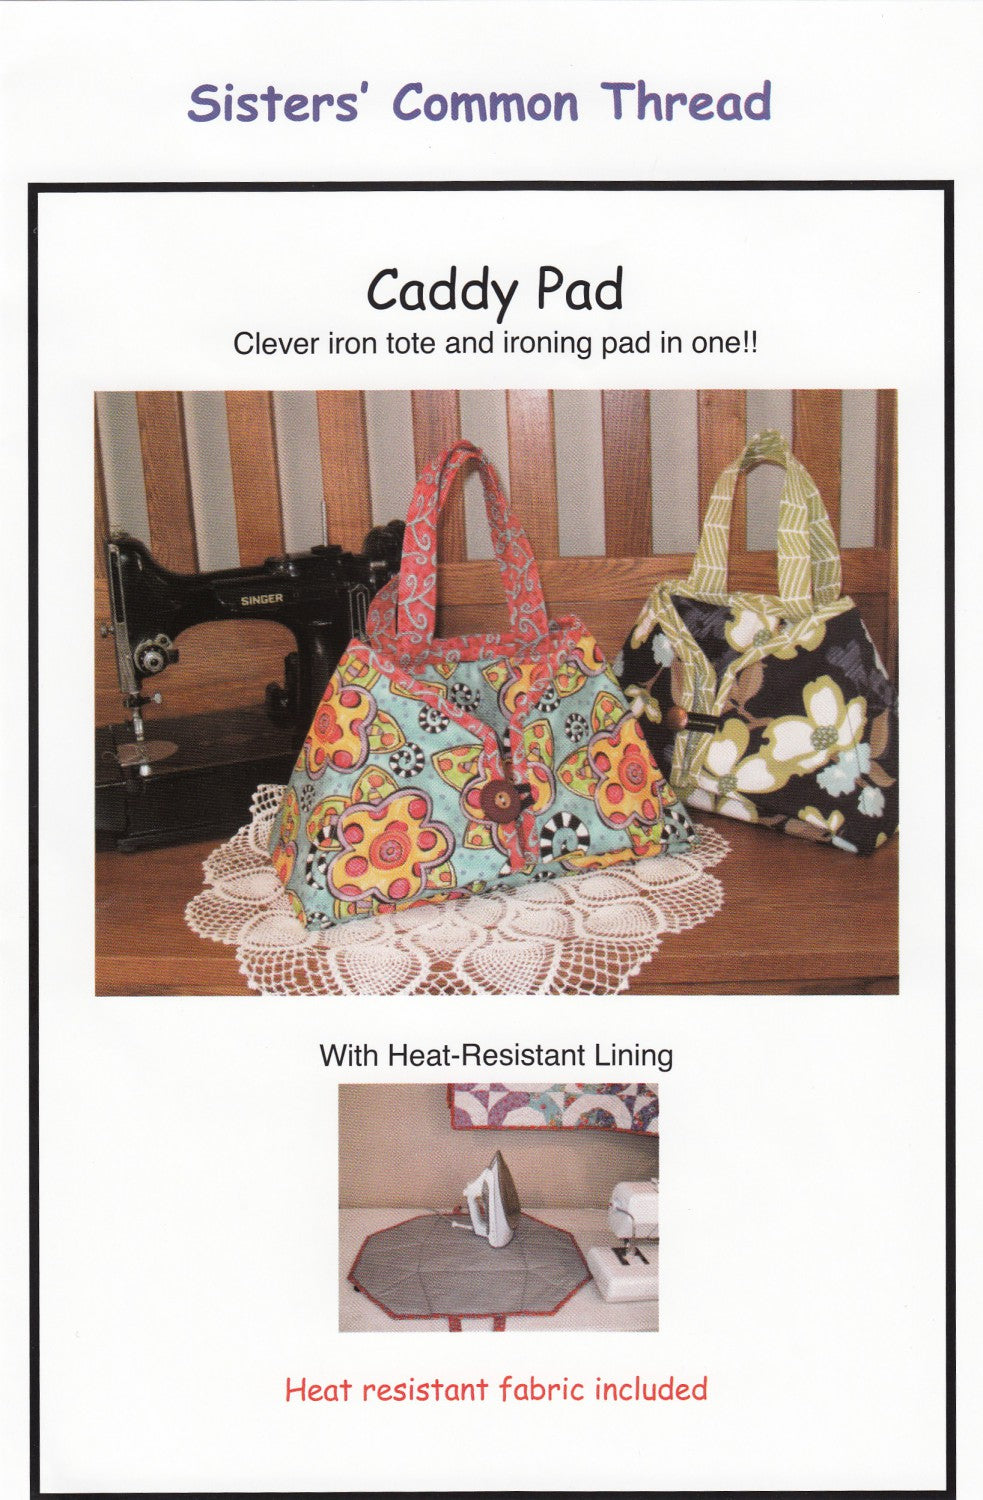 Caddy Pad Full Size, # SCT10103, from Sisters Common Thread